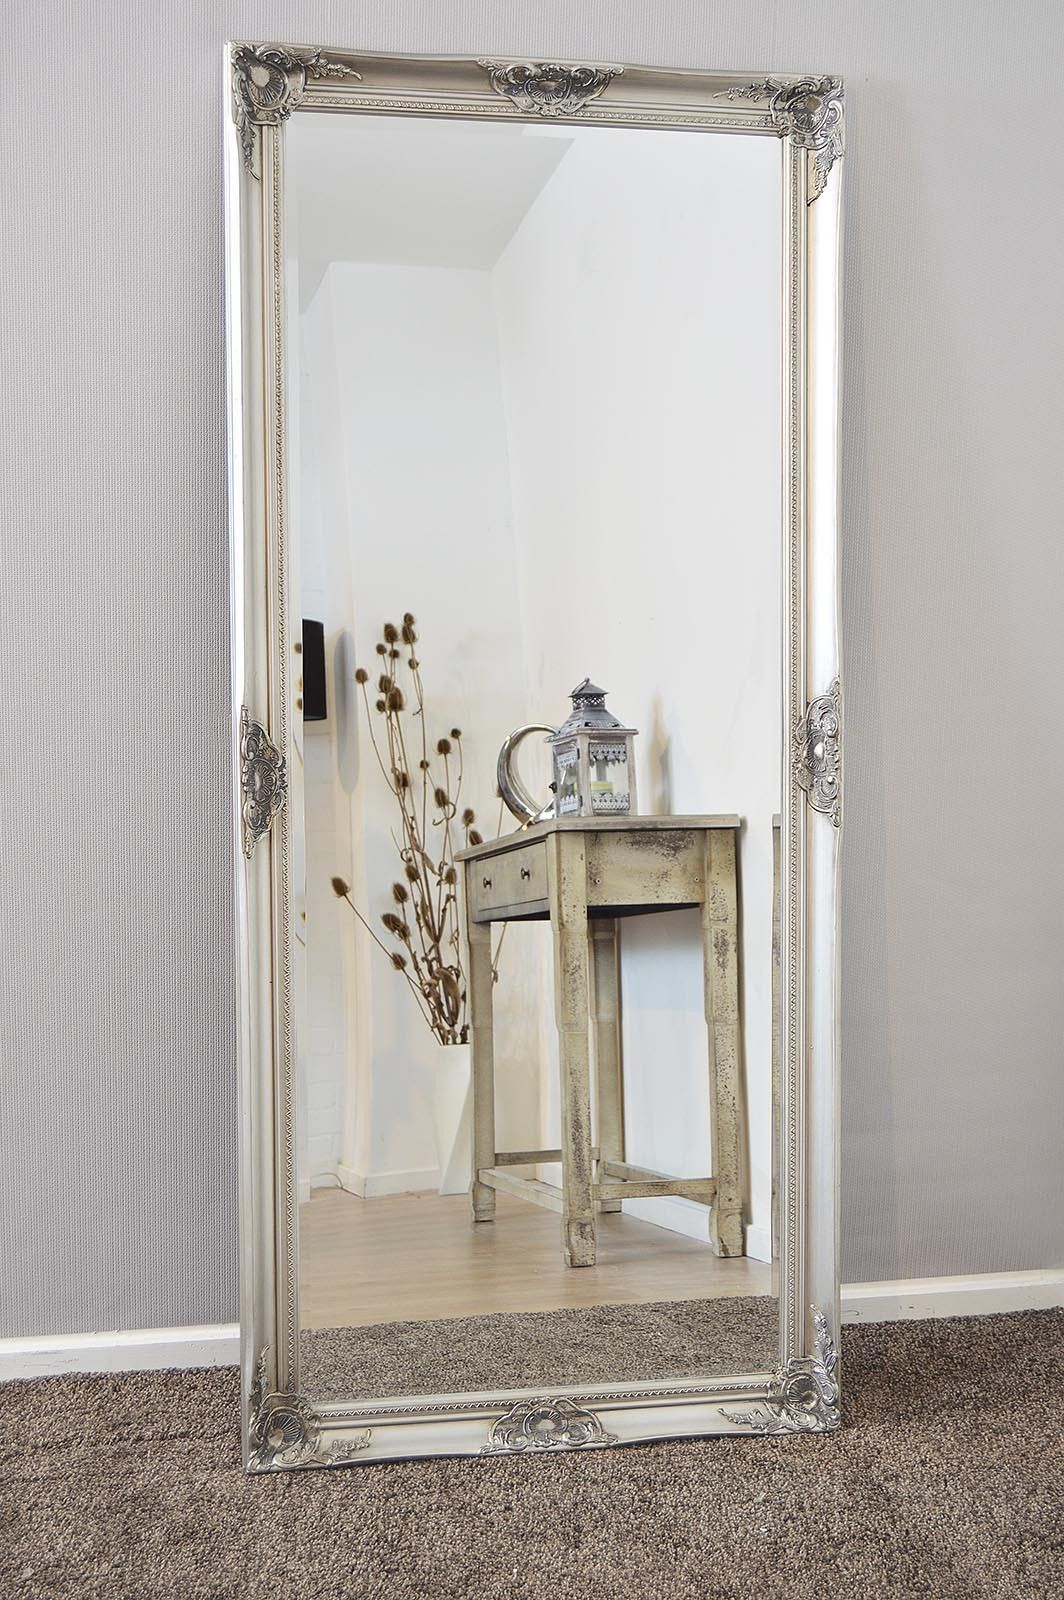 New Large Silver Decorative Shab Chic Wall Mirror 5ft3 X 2ft5 With Regard To Shabby Chic Wall Mirrors (Photo 8 of 15)